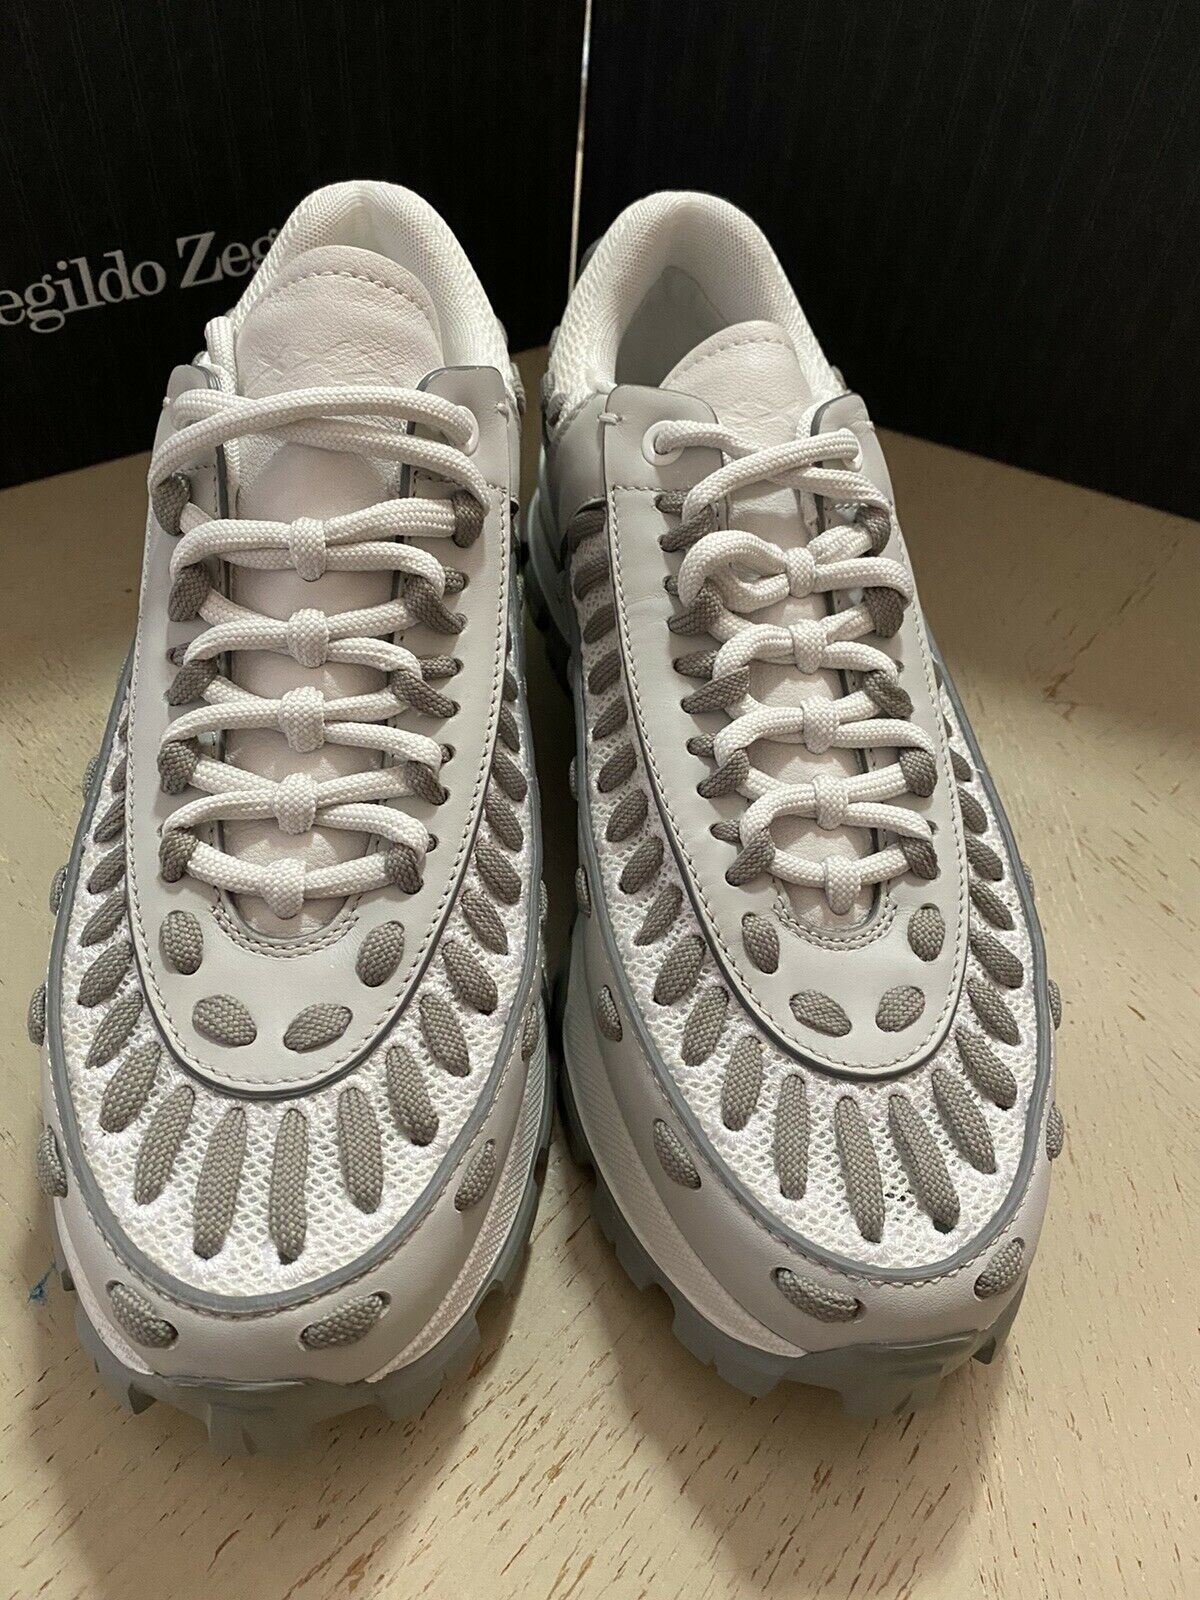 New $795 Ermenegildo Zegna Couture Leather Sneakers Shoes White/Gray 11 US Italy